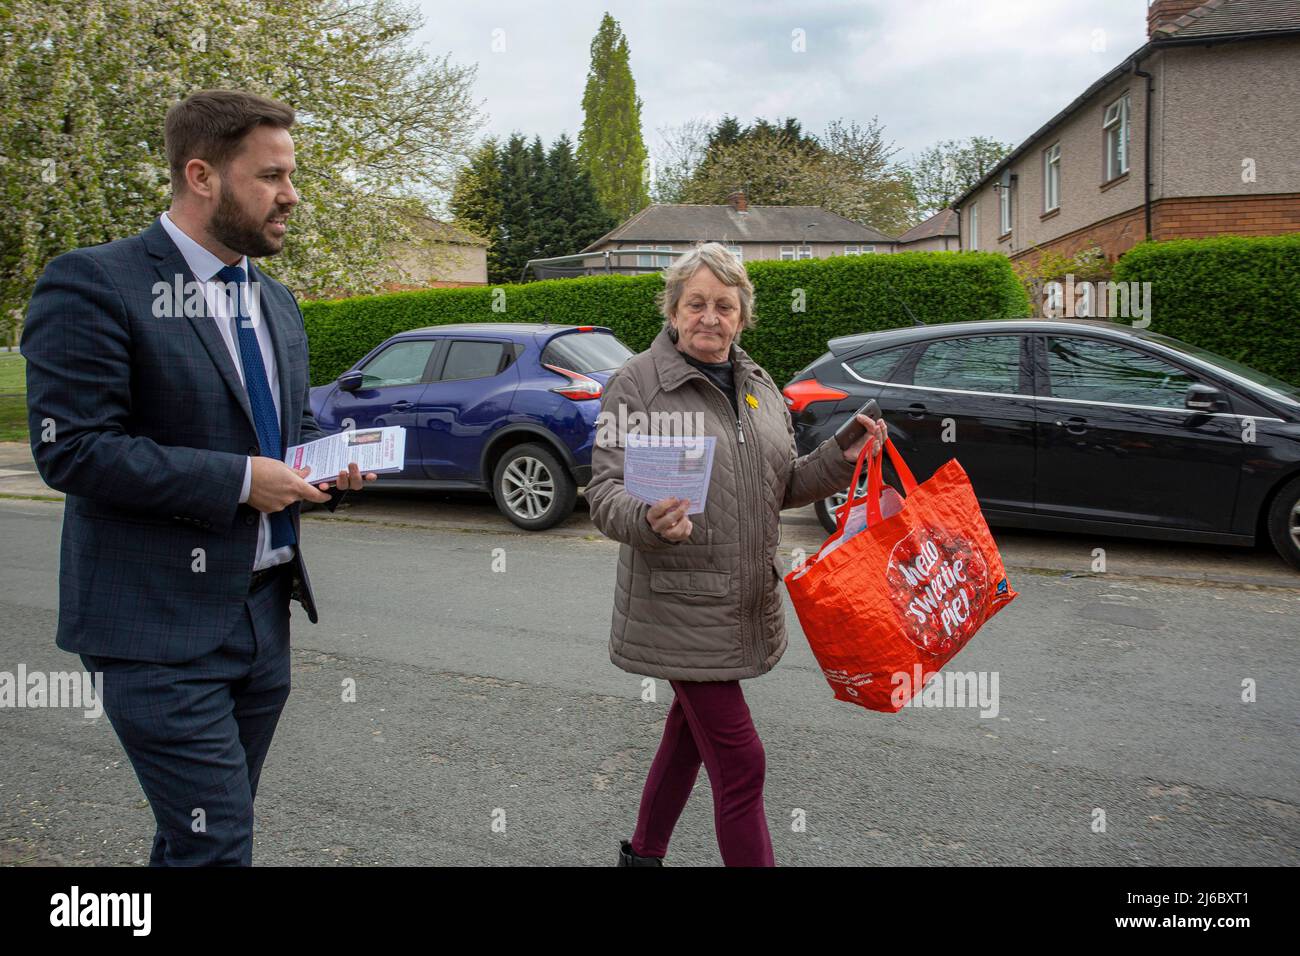 Michael Graham, Labour councillor for West  Wakefield, on a campaign trail of canvassing in a  deprived  area in Wakefield , West Yorkshire, England.© Stock Photo